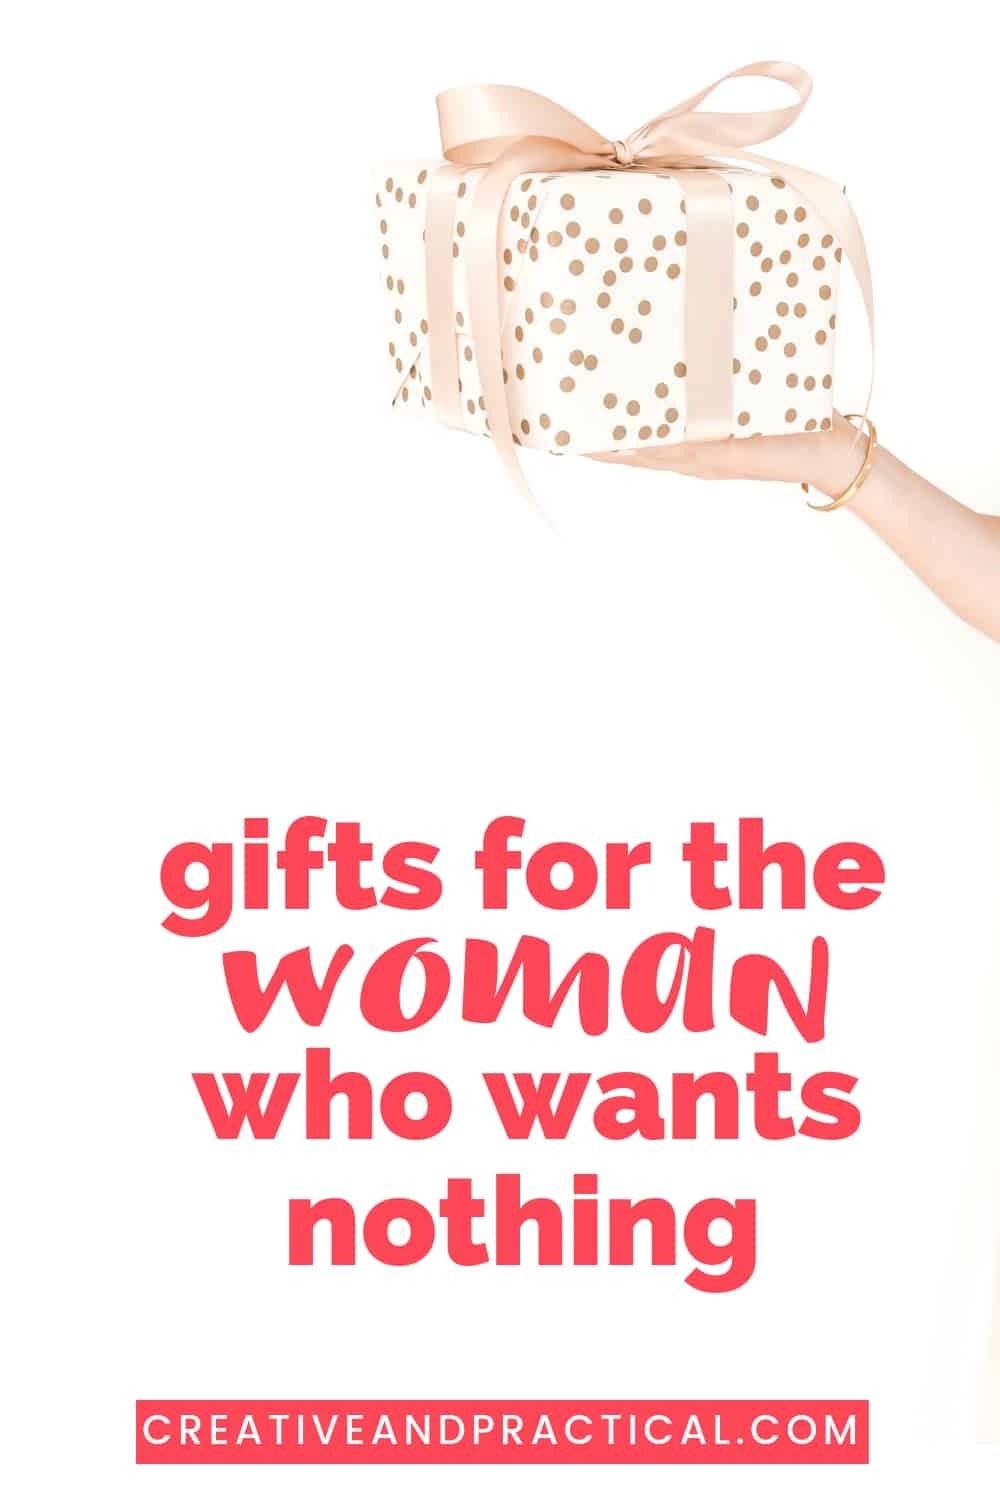 Unique Gift Ideas for The Woman Who Wants Nothing. Creative ideas for mothers, friends, or sisters. Simple Inspiration to Make Gift Giving Fun and Meaningful. #birthday #girlfriends #awesome #simple #fun #forwomen #budget #toget ♥︎ cheerfulcook.com via @cheerfulcook